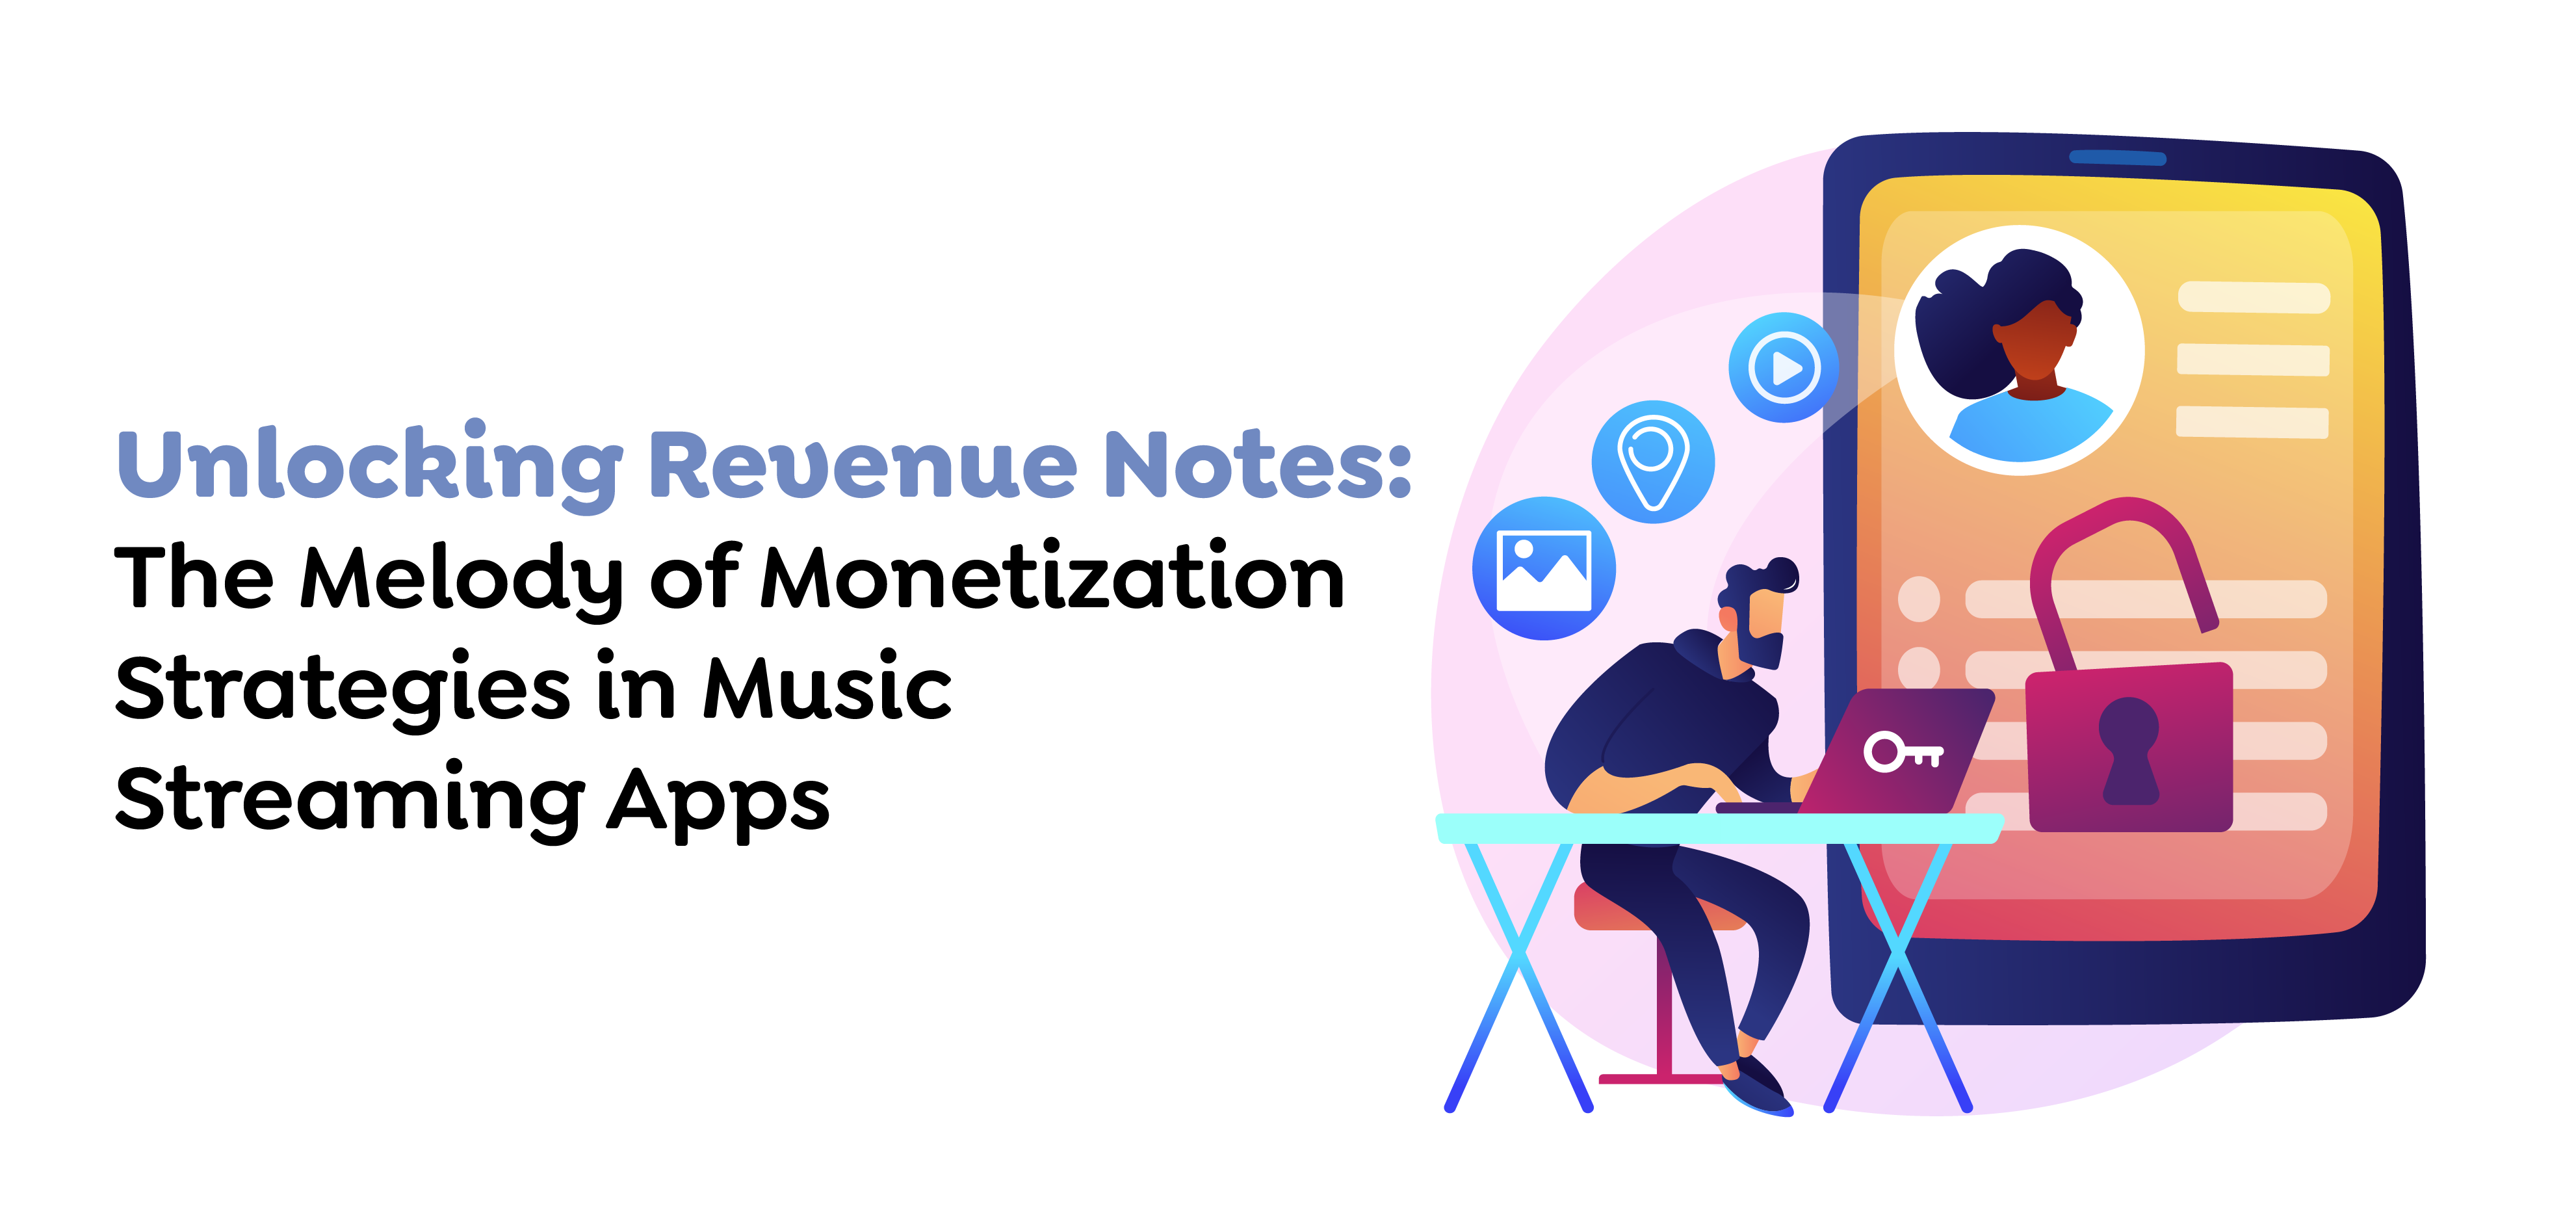 Unlocking Revenue Notes- The Melody of Monetization Strategies in Music Streaming Apps